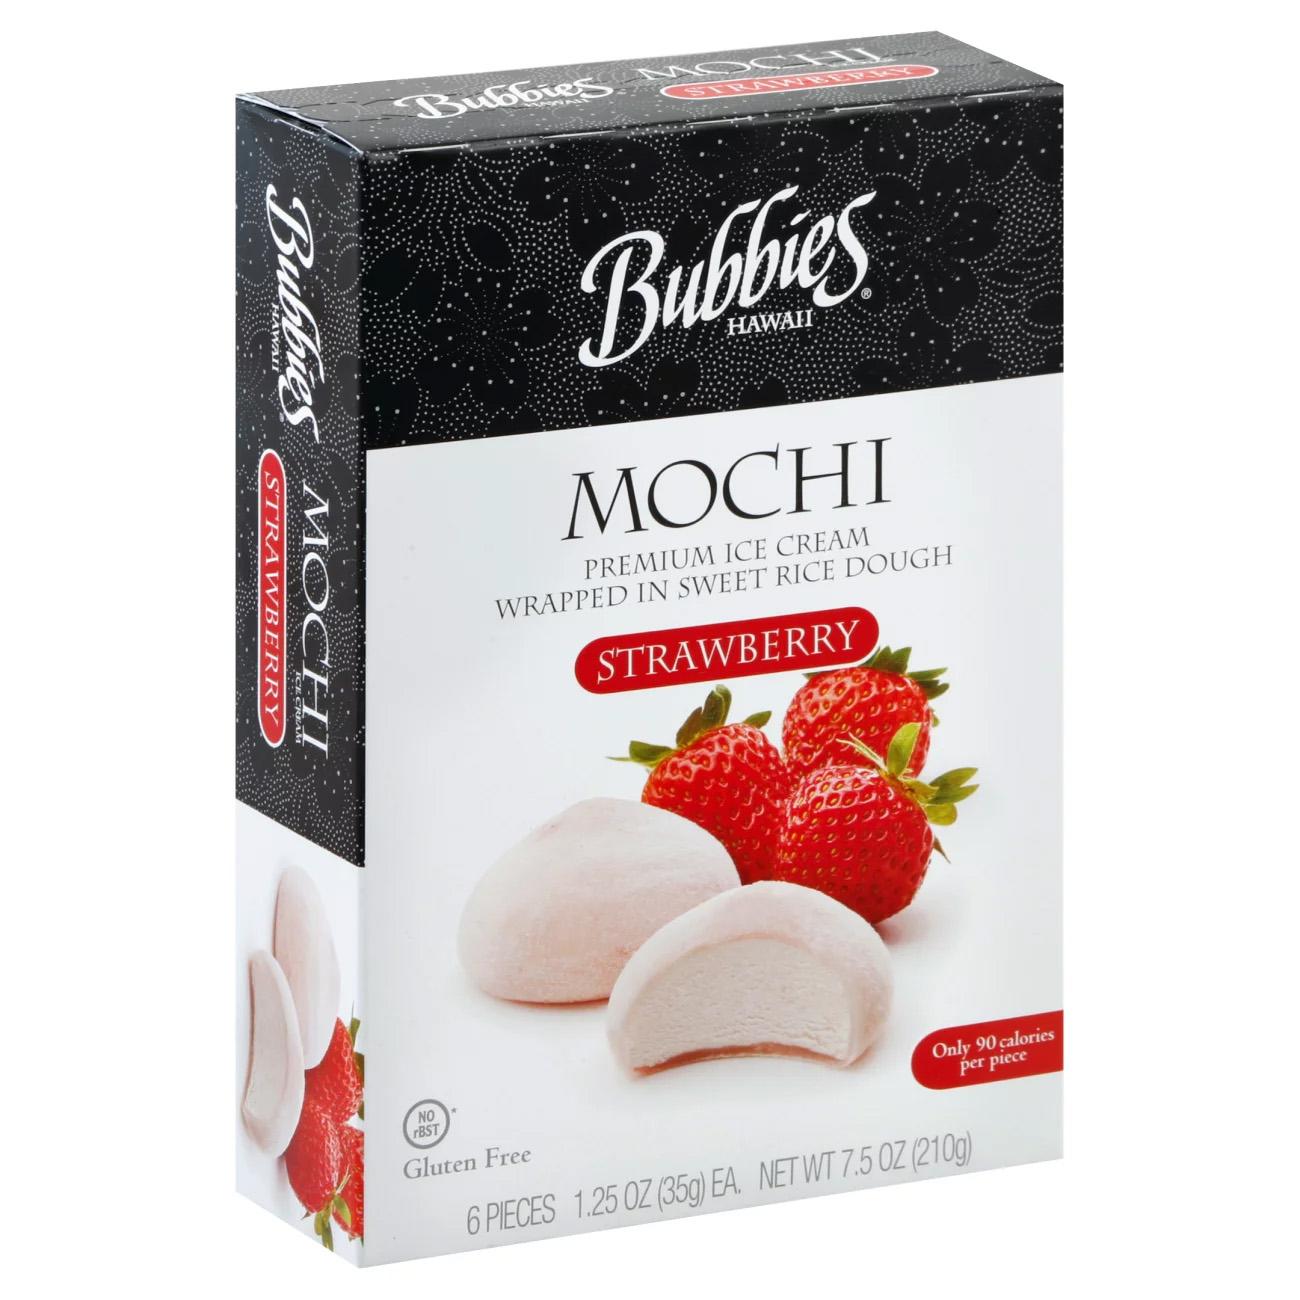 Free Bubbies Mochi Ice Cream at Whole Foods Market